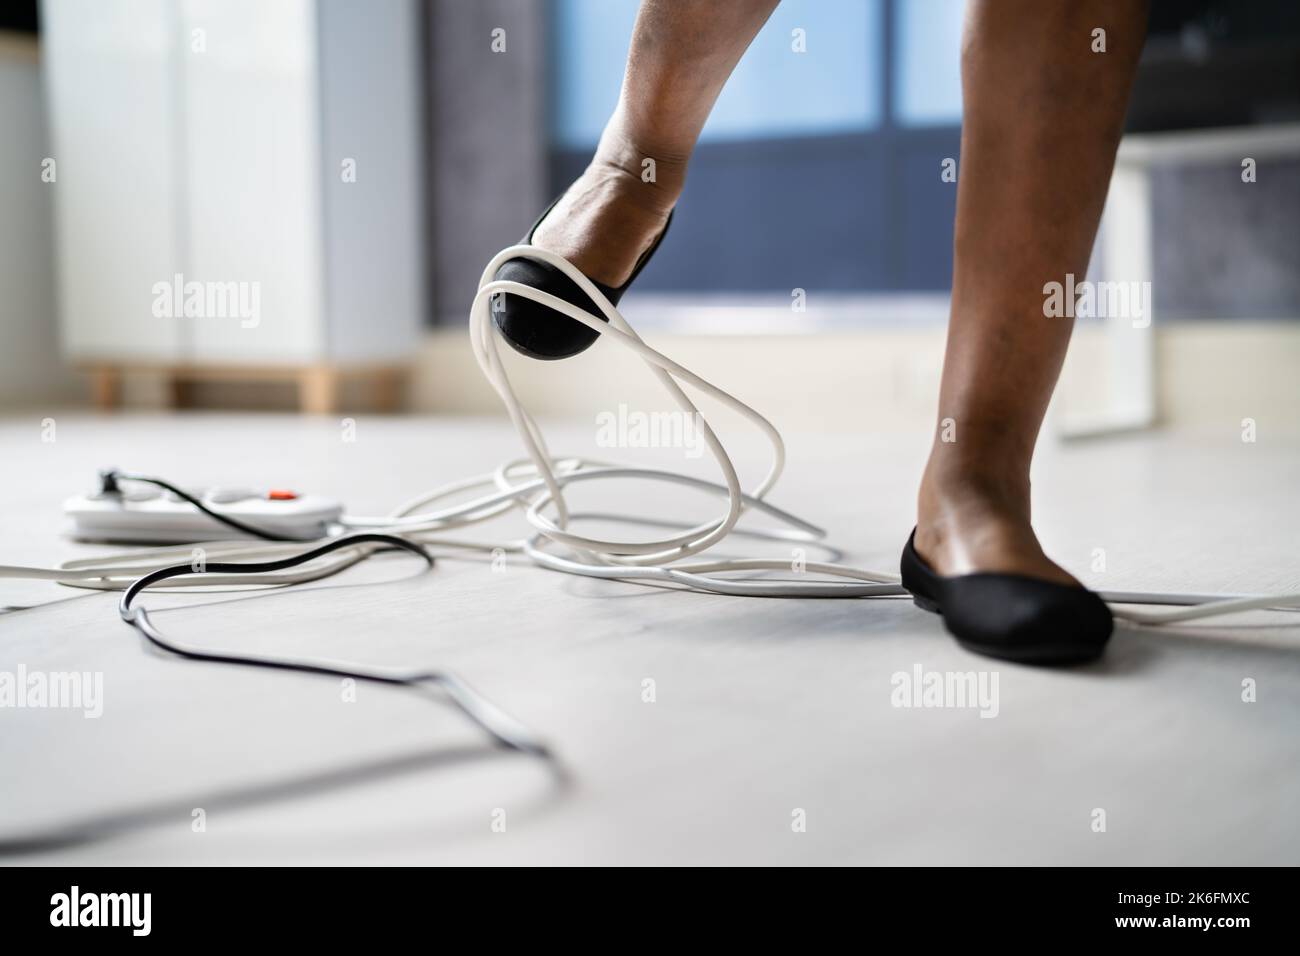 Stumble And Fall Over Wire In Office Stock Photo